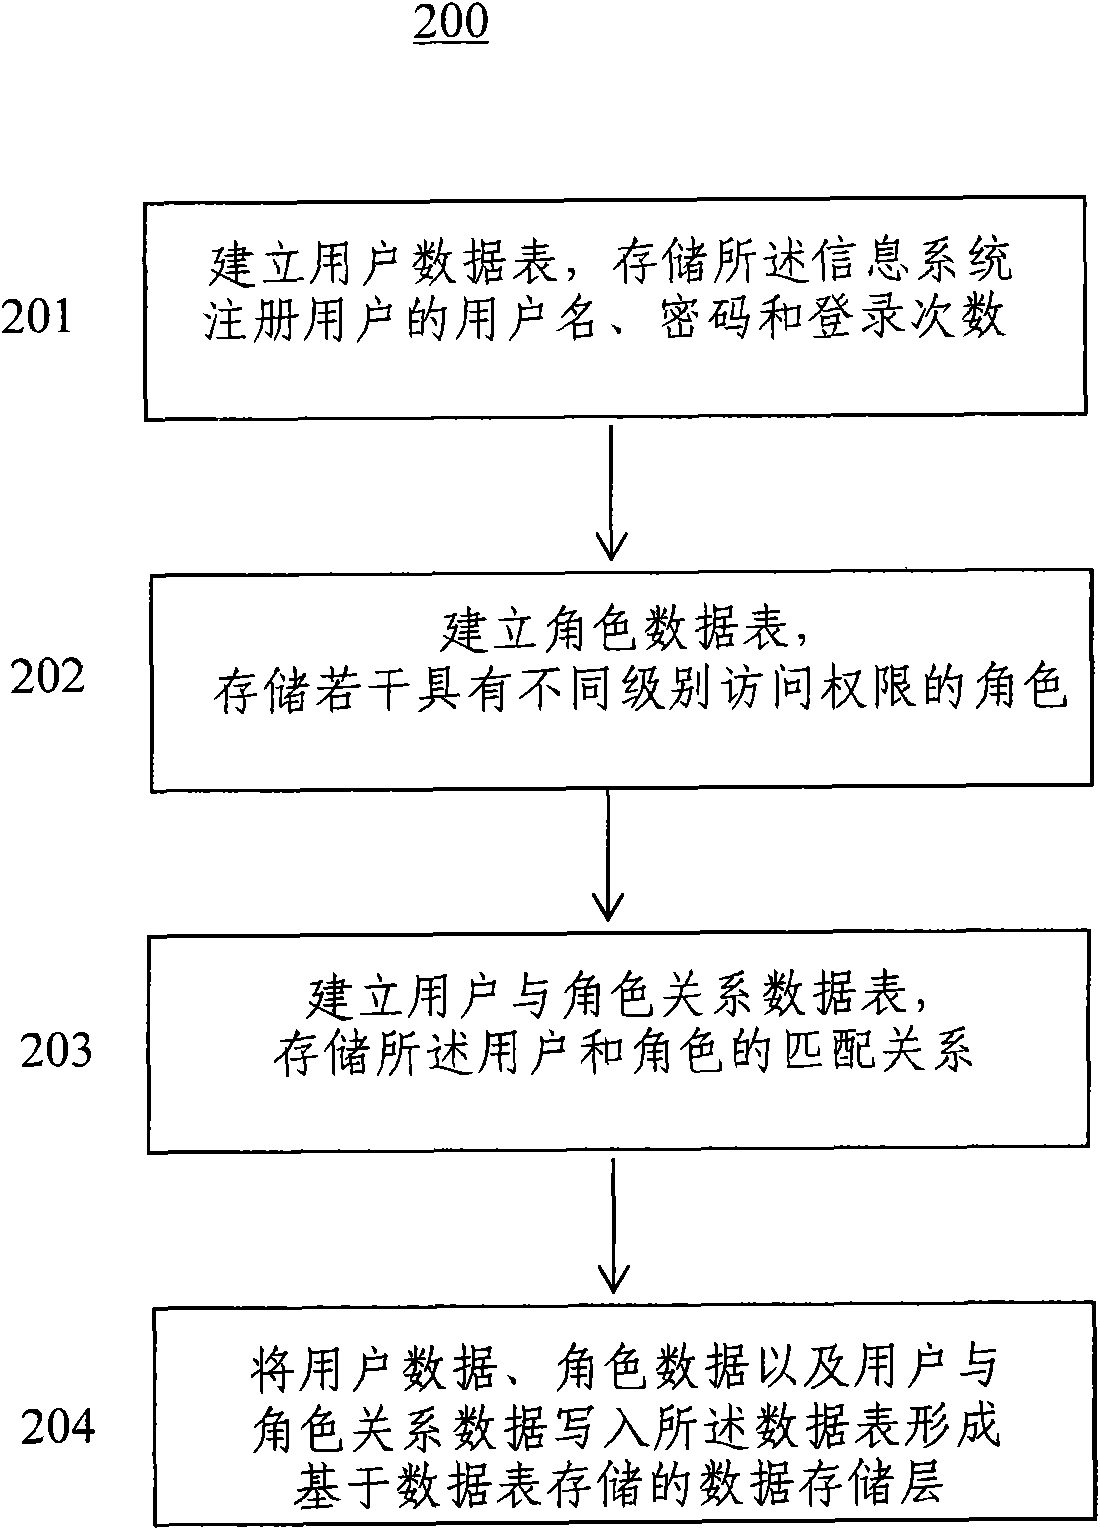 Role access control-based information system data storage layer and building method